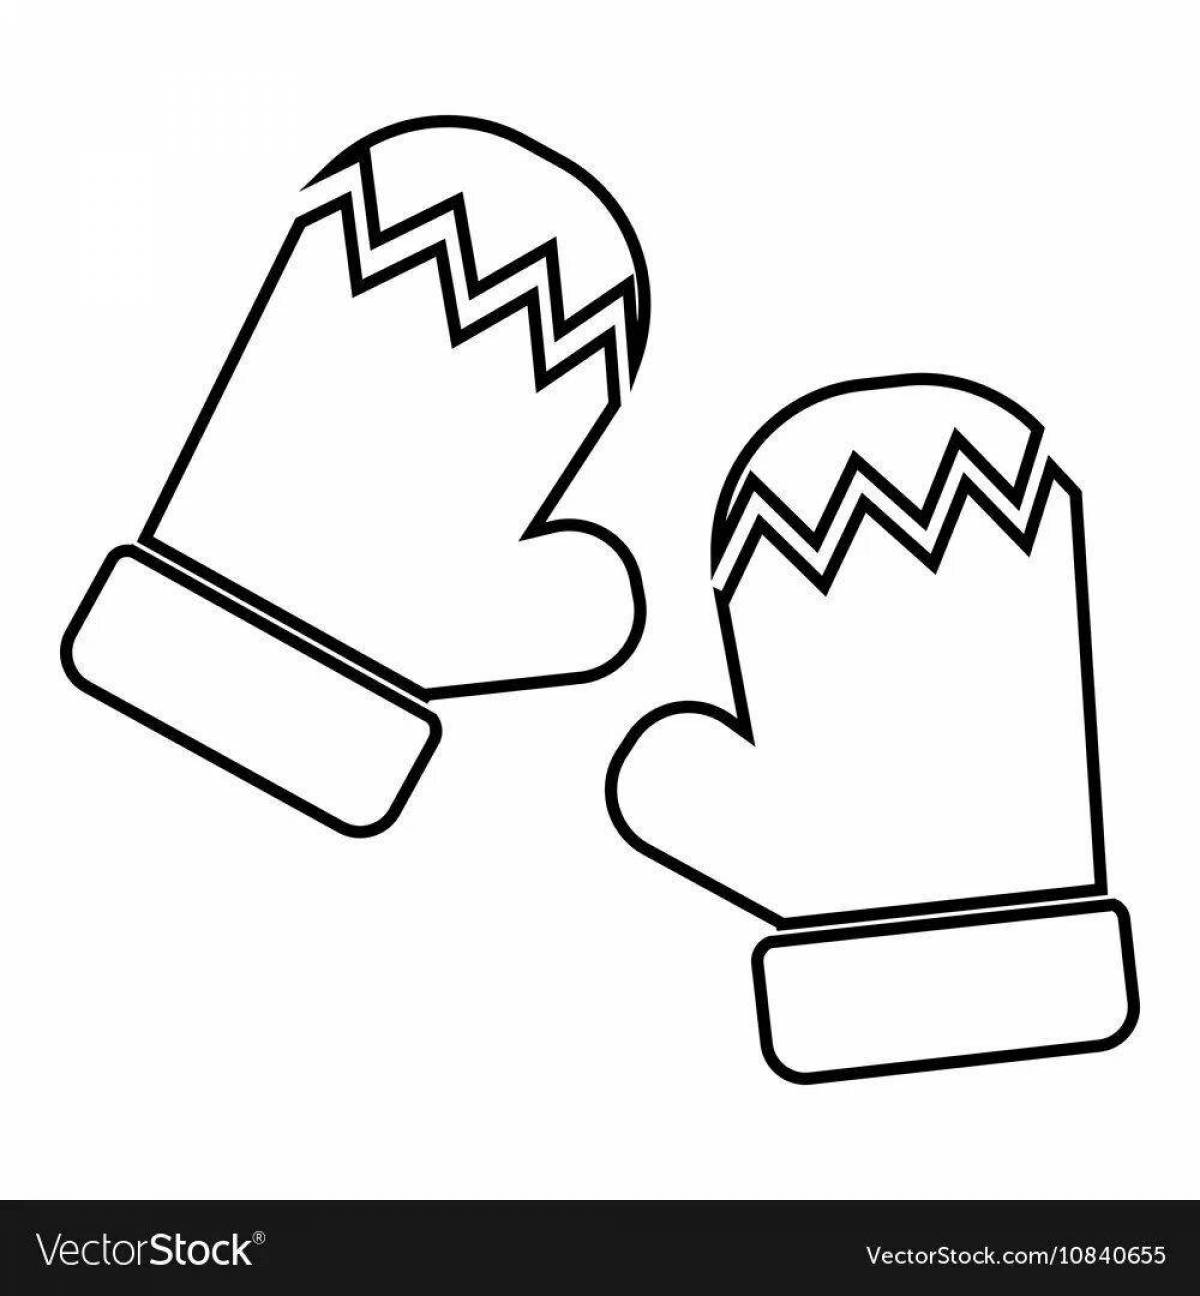 Adorable rubber mittens coloring page